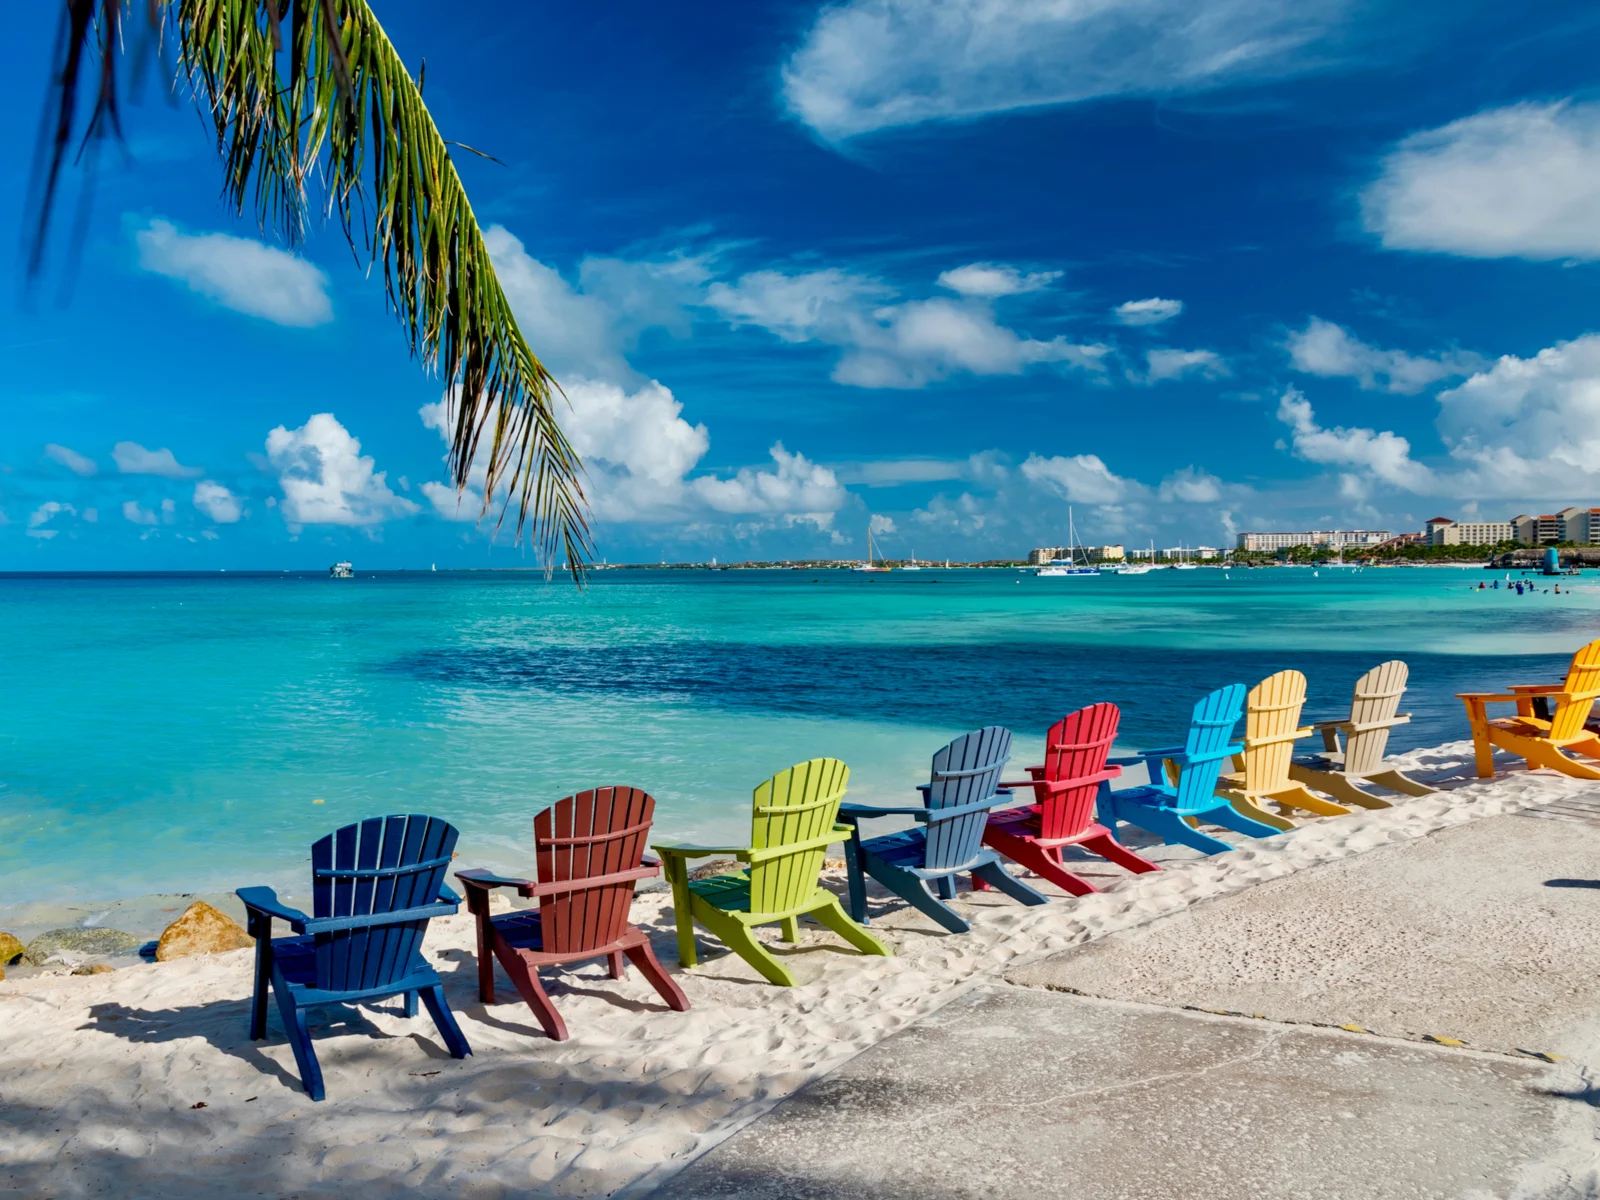 Oranjestad, Aruba pictured with colorful chairs on the beach during the least busy time to visit